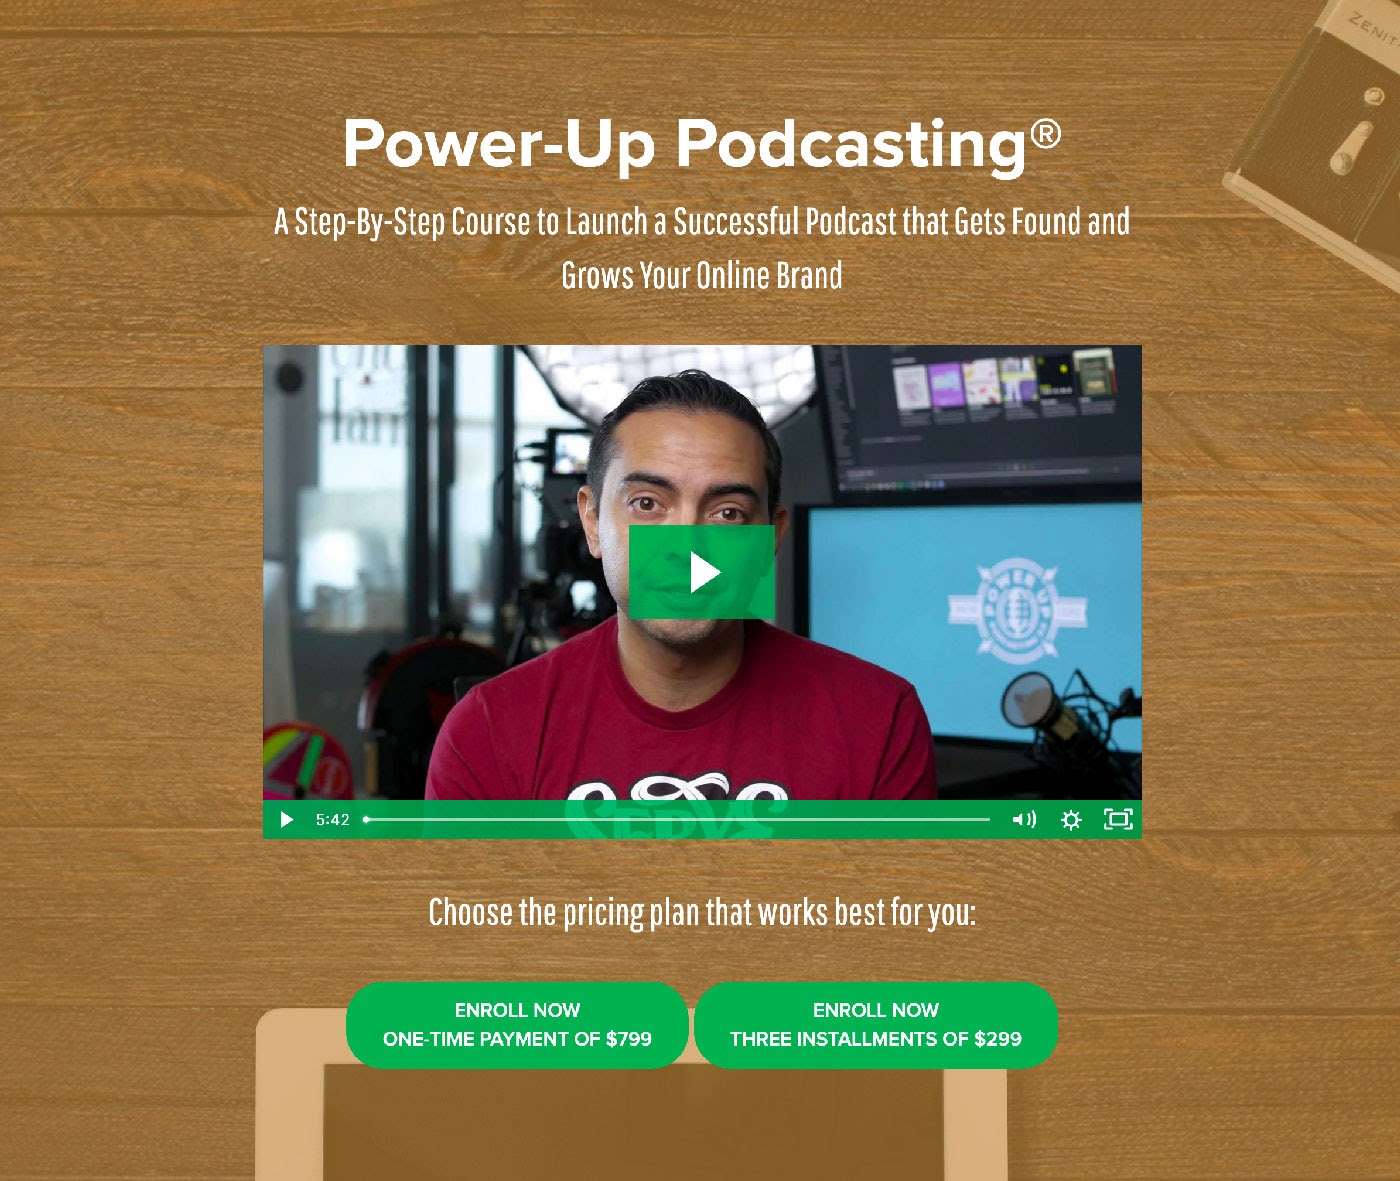 Power-Up Podcasting sale page